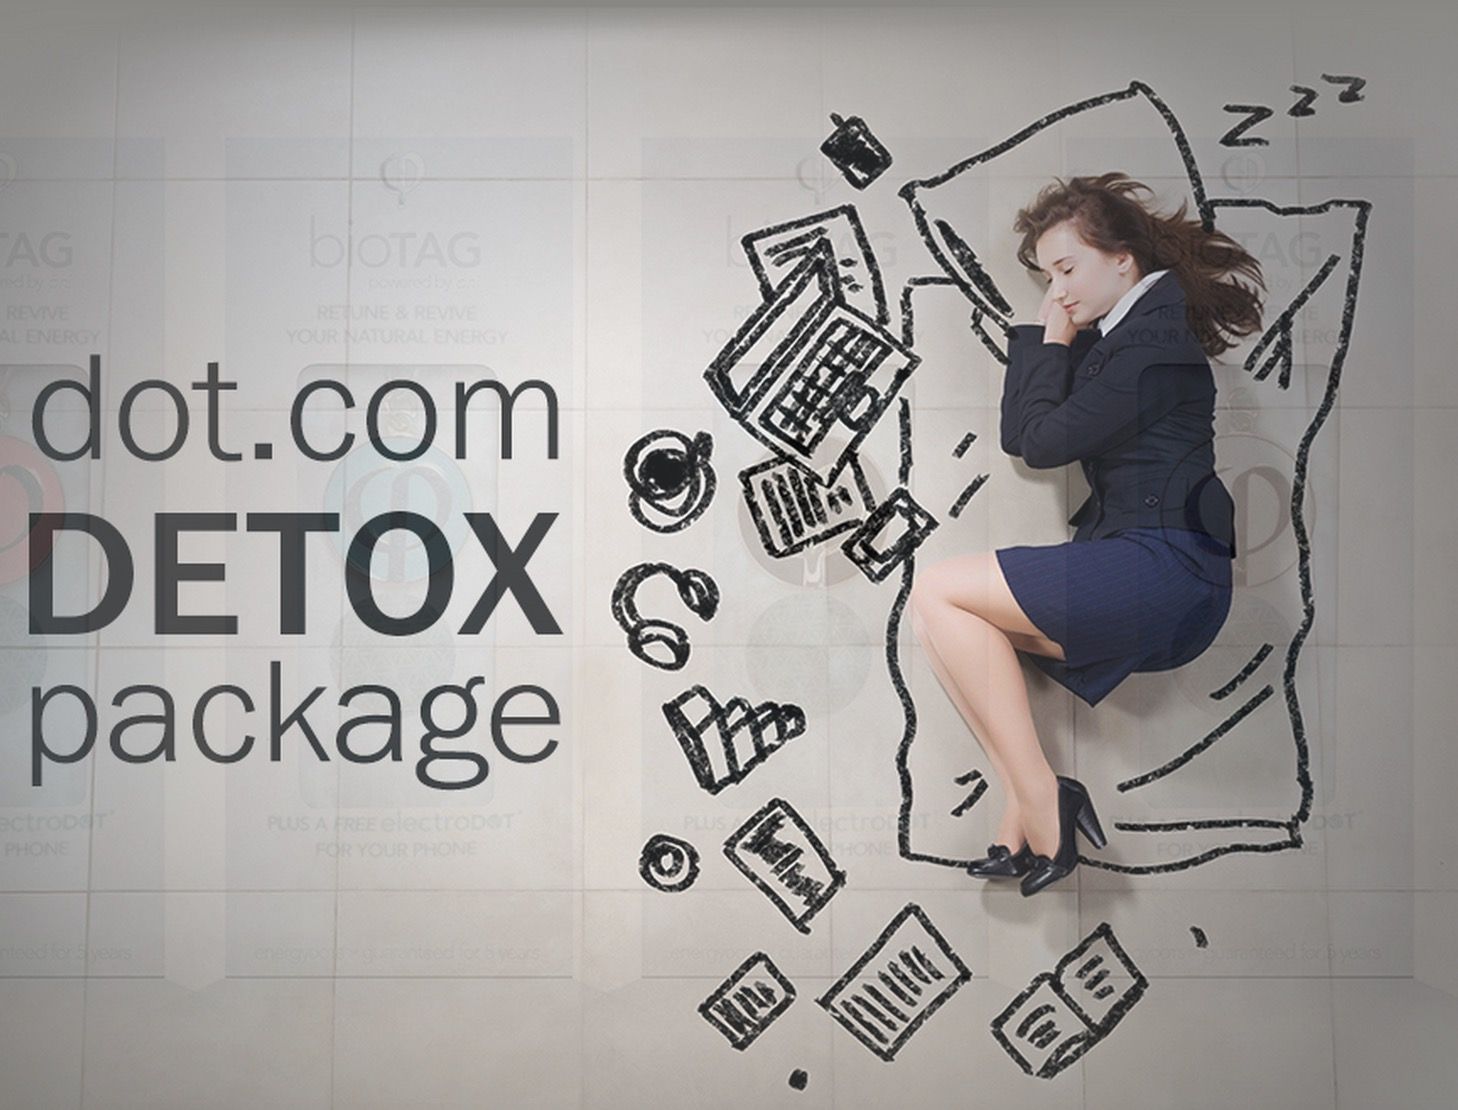 hotel s dot com detox package claims to tackle harmful effects of modern tech image 1